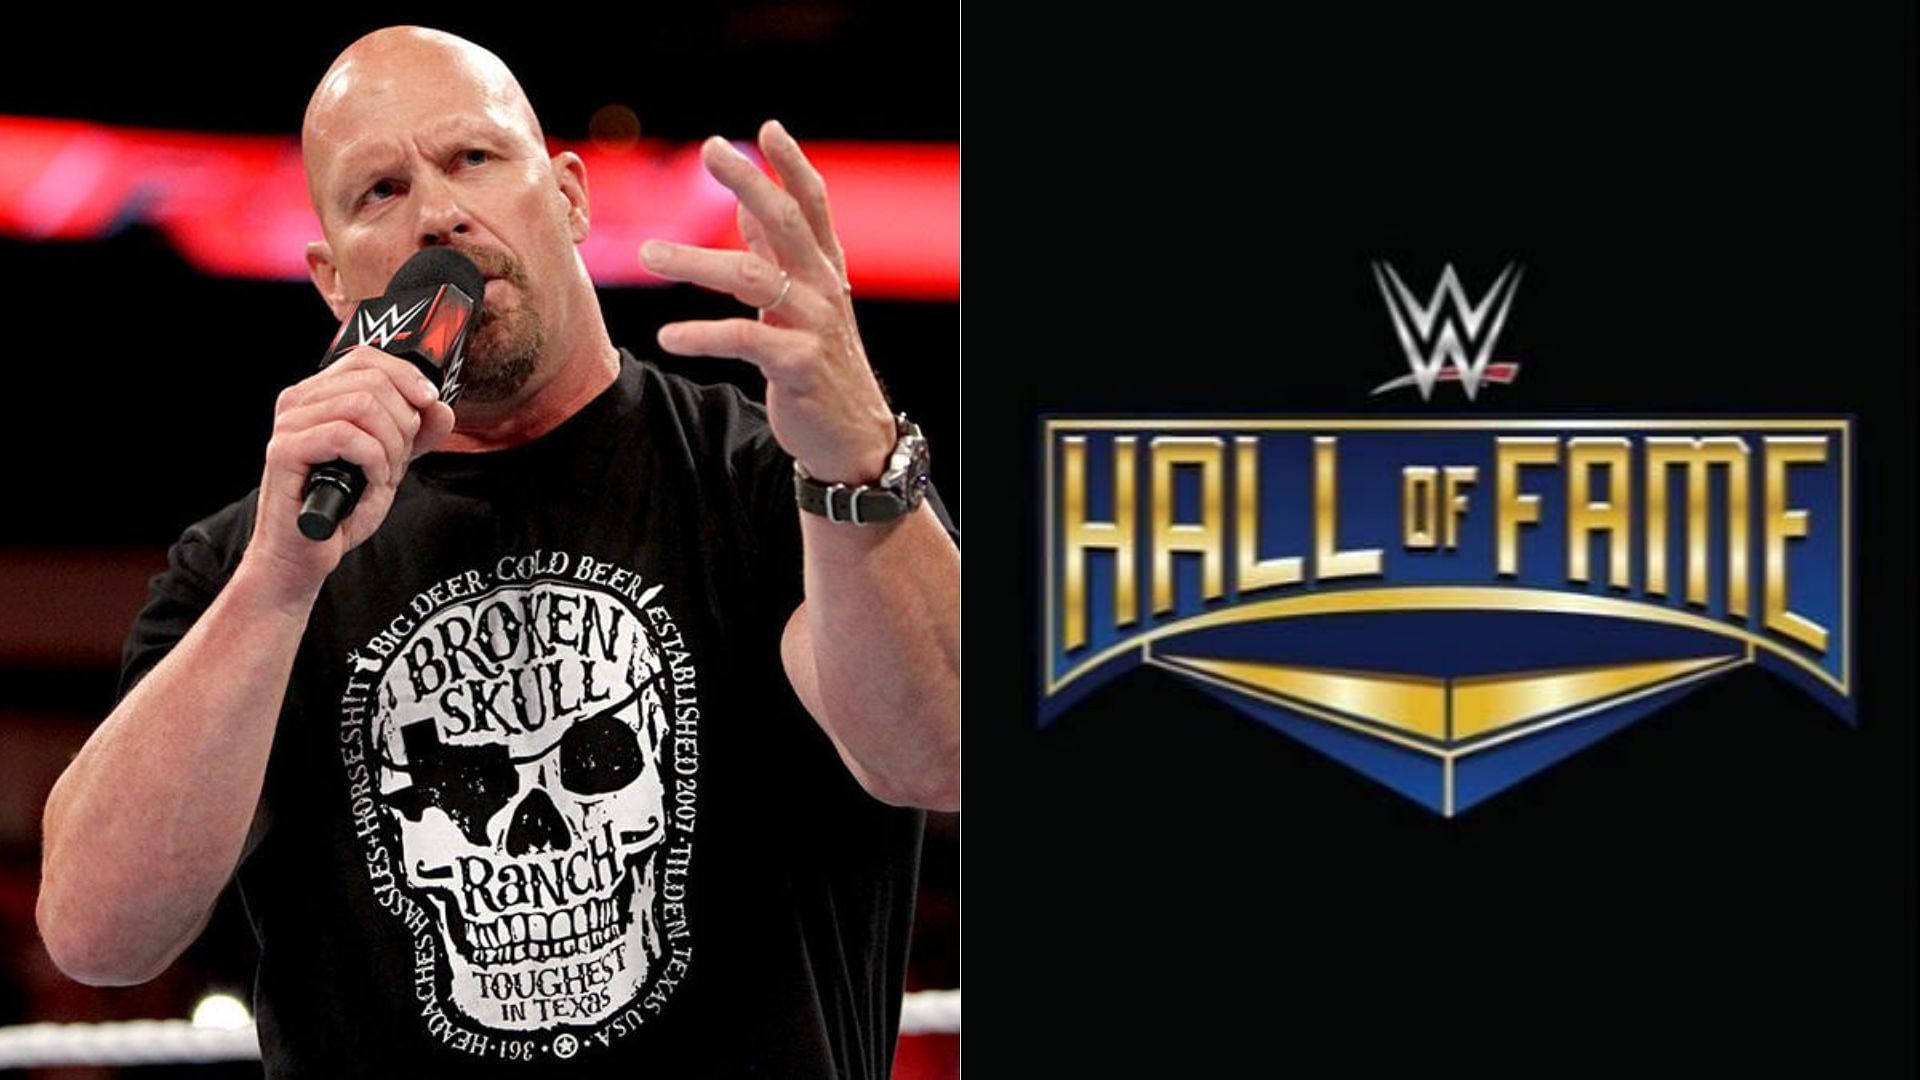 Steve Austin joined the WWE Hall of Fame in 2009.